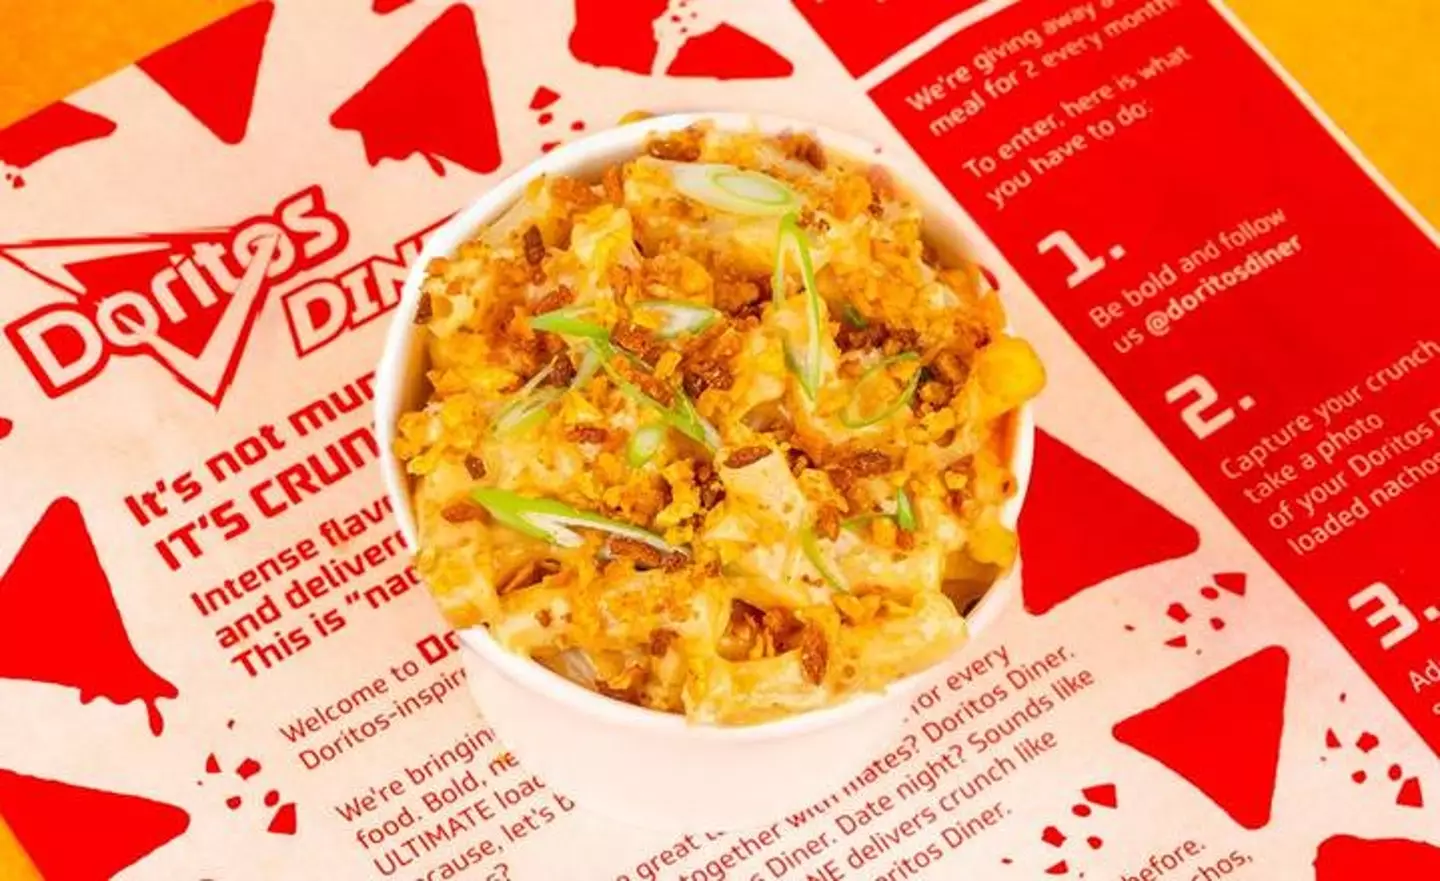 There are also vegetarian alternatives like this Tangy Mac & Cheese (